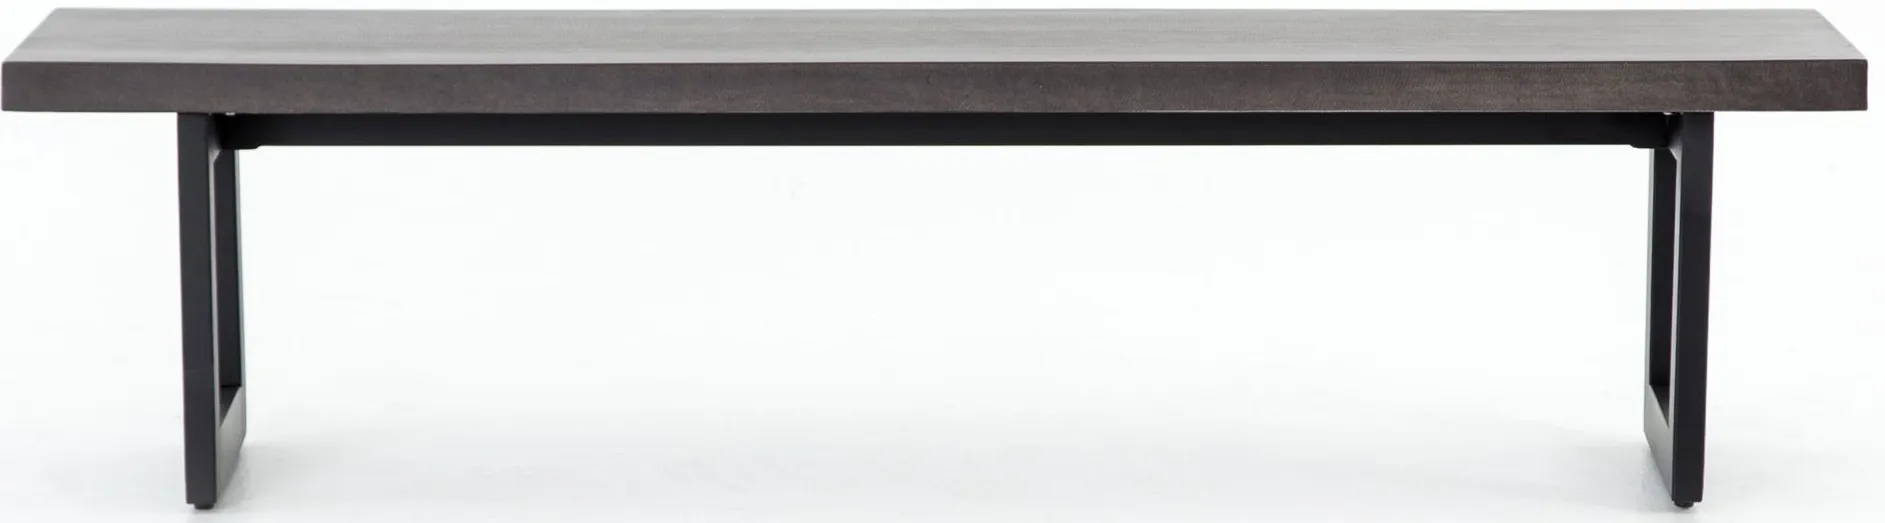 Judith Outdoor Dining Bench in Black Lavastone by Four Hands